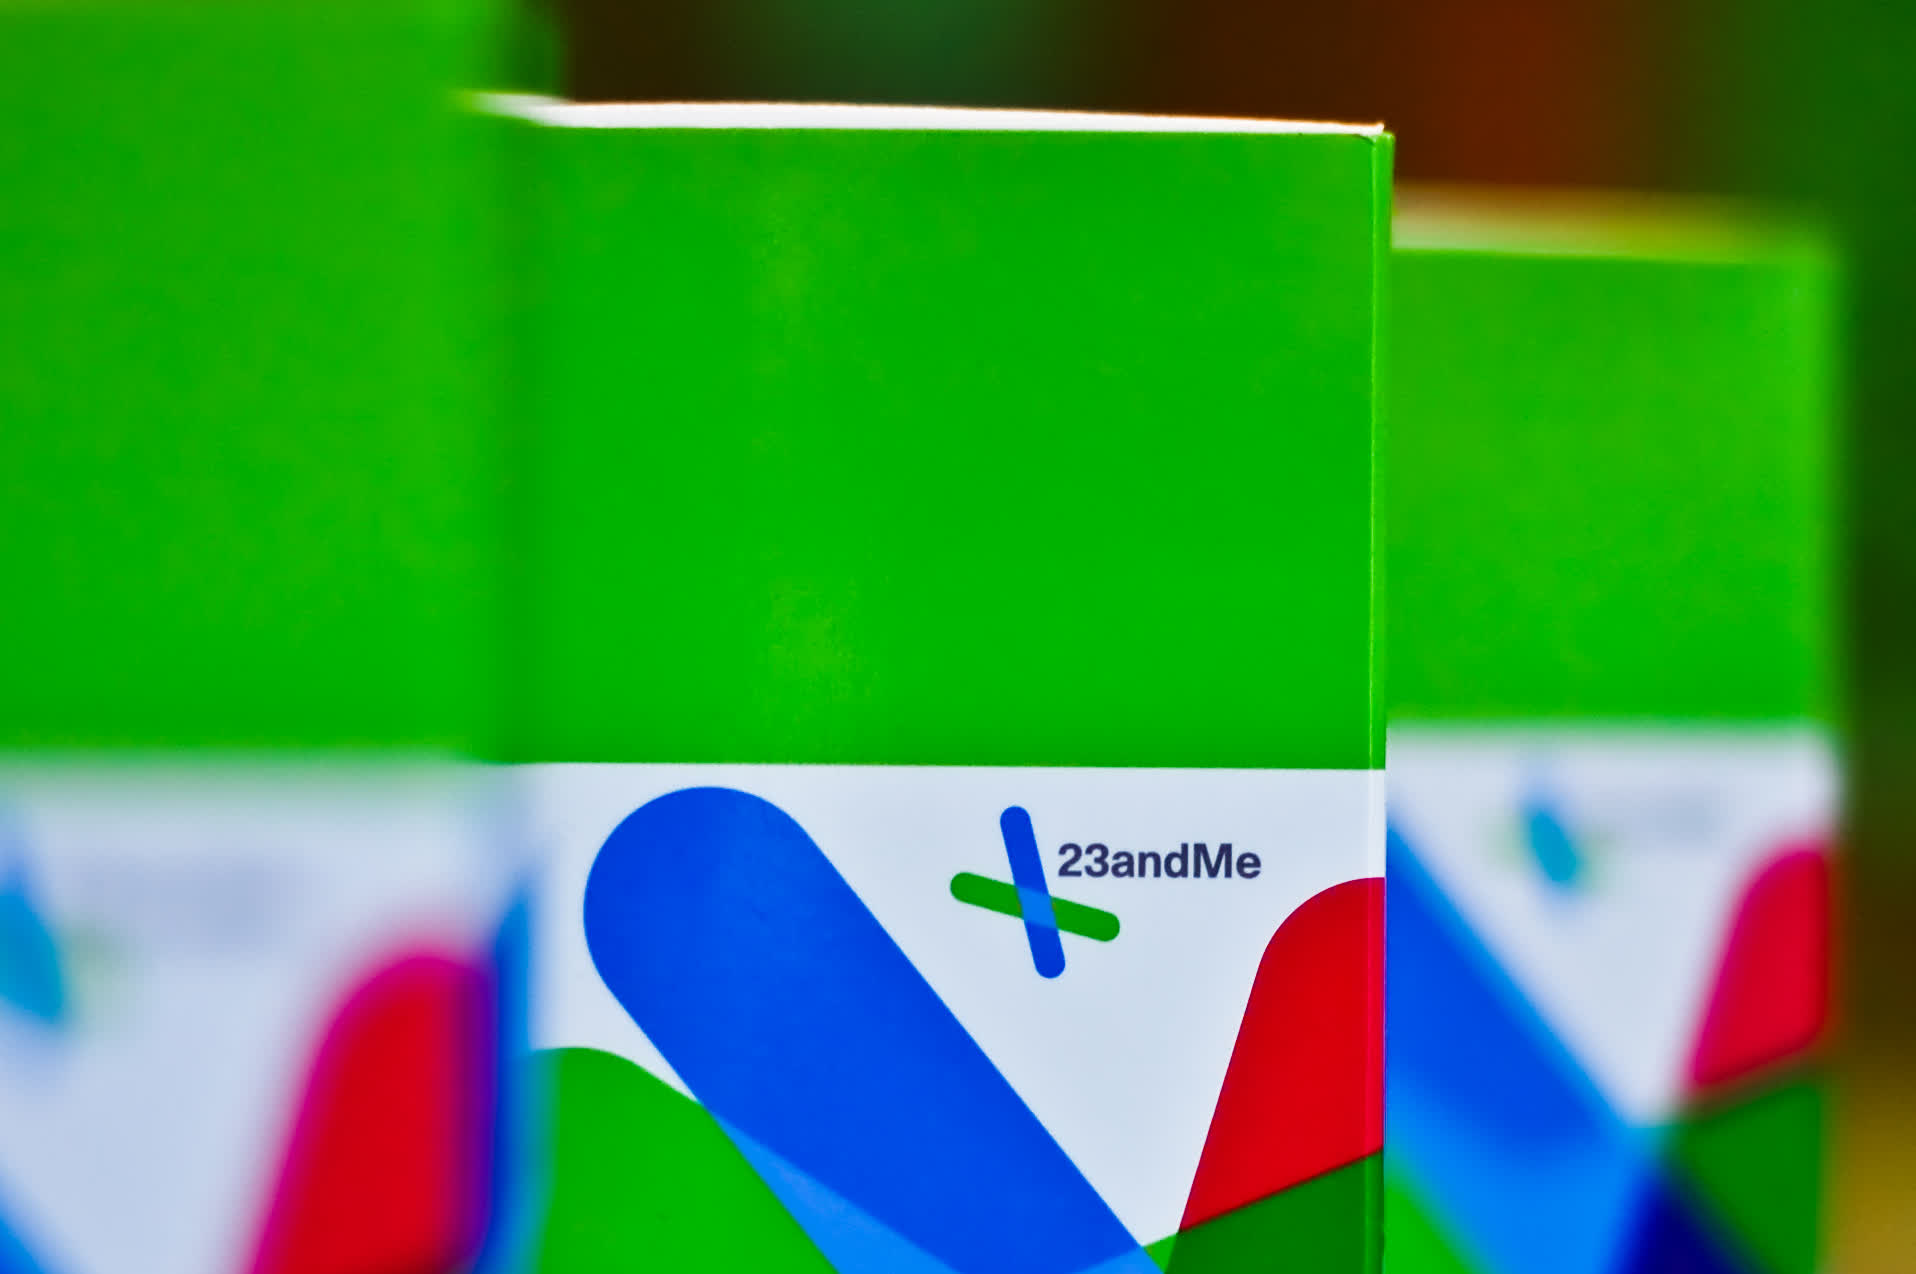 23andMe confirms last year's massive data breach went unnoticed for five months, hackers stole raw genotype data